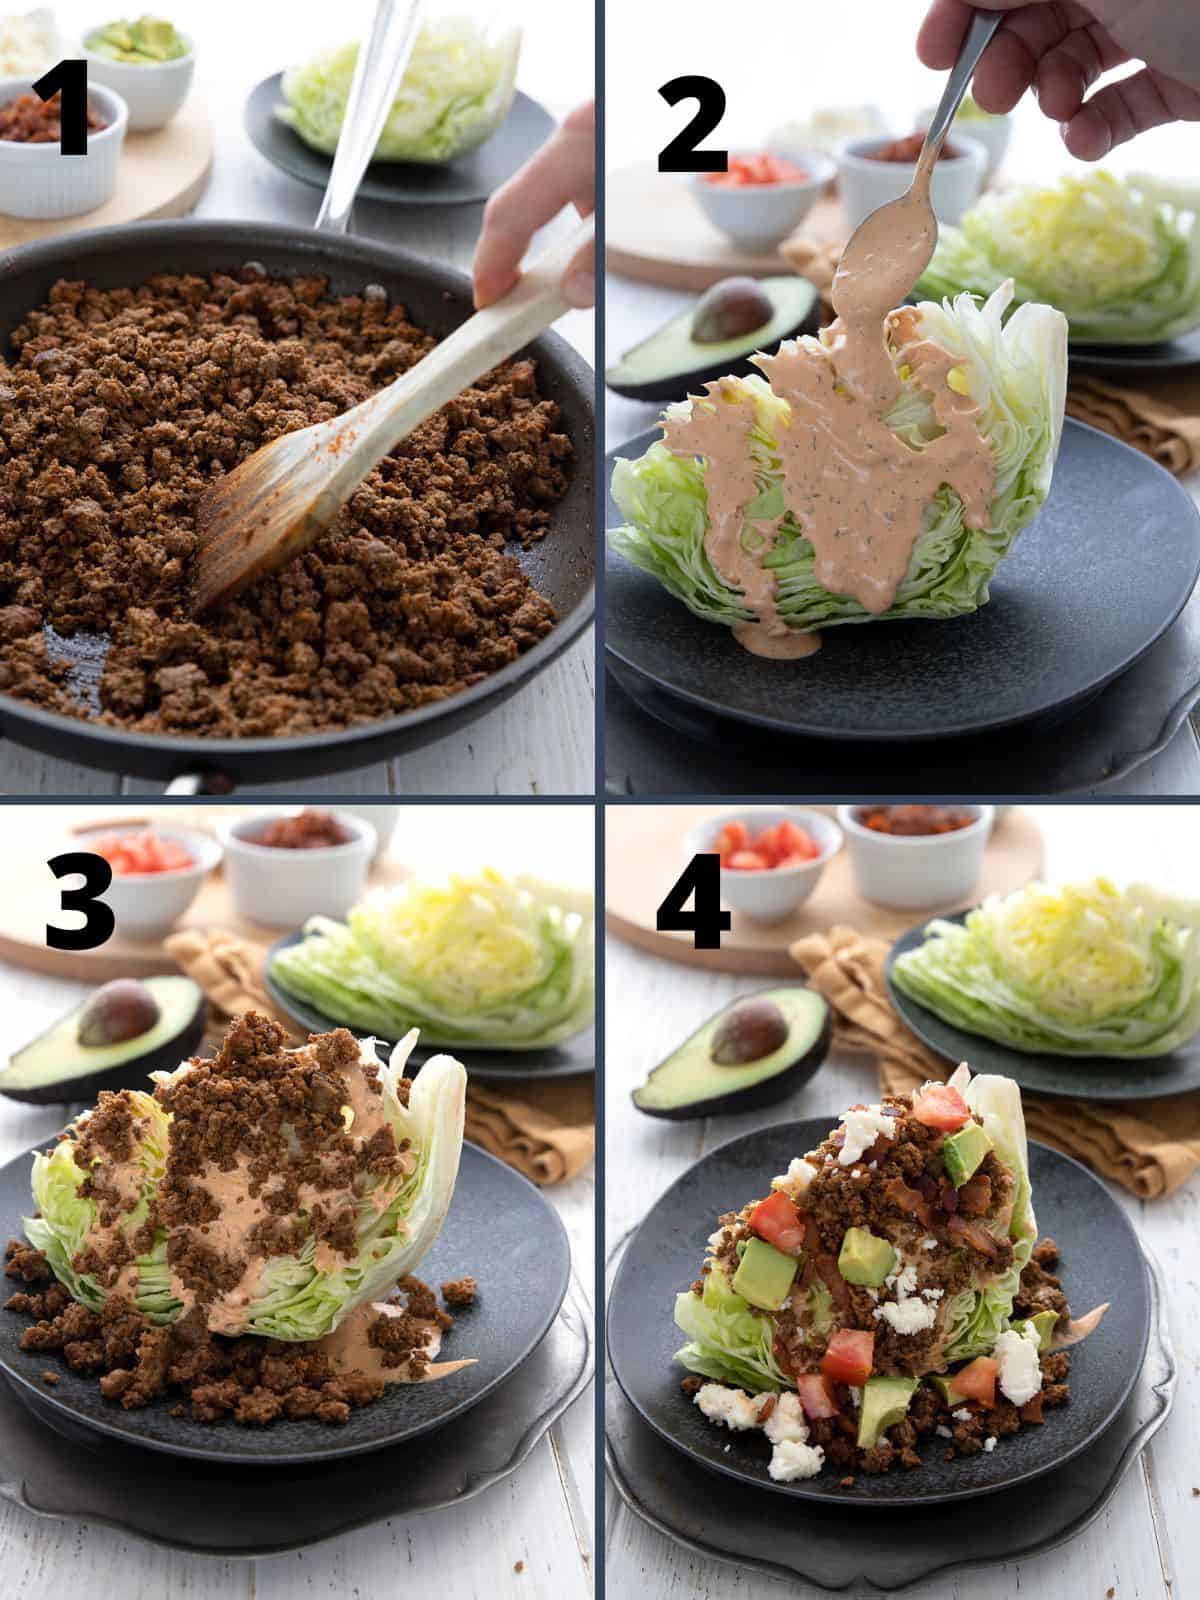 A collage of 4 images showing how to make Mexican Wedge Salad.